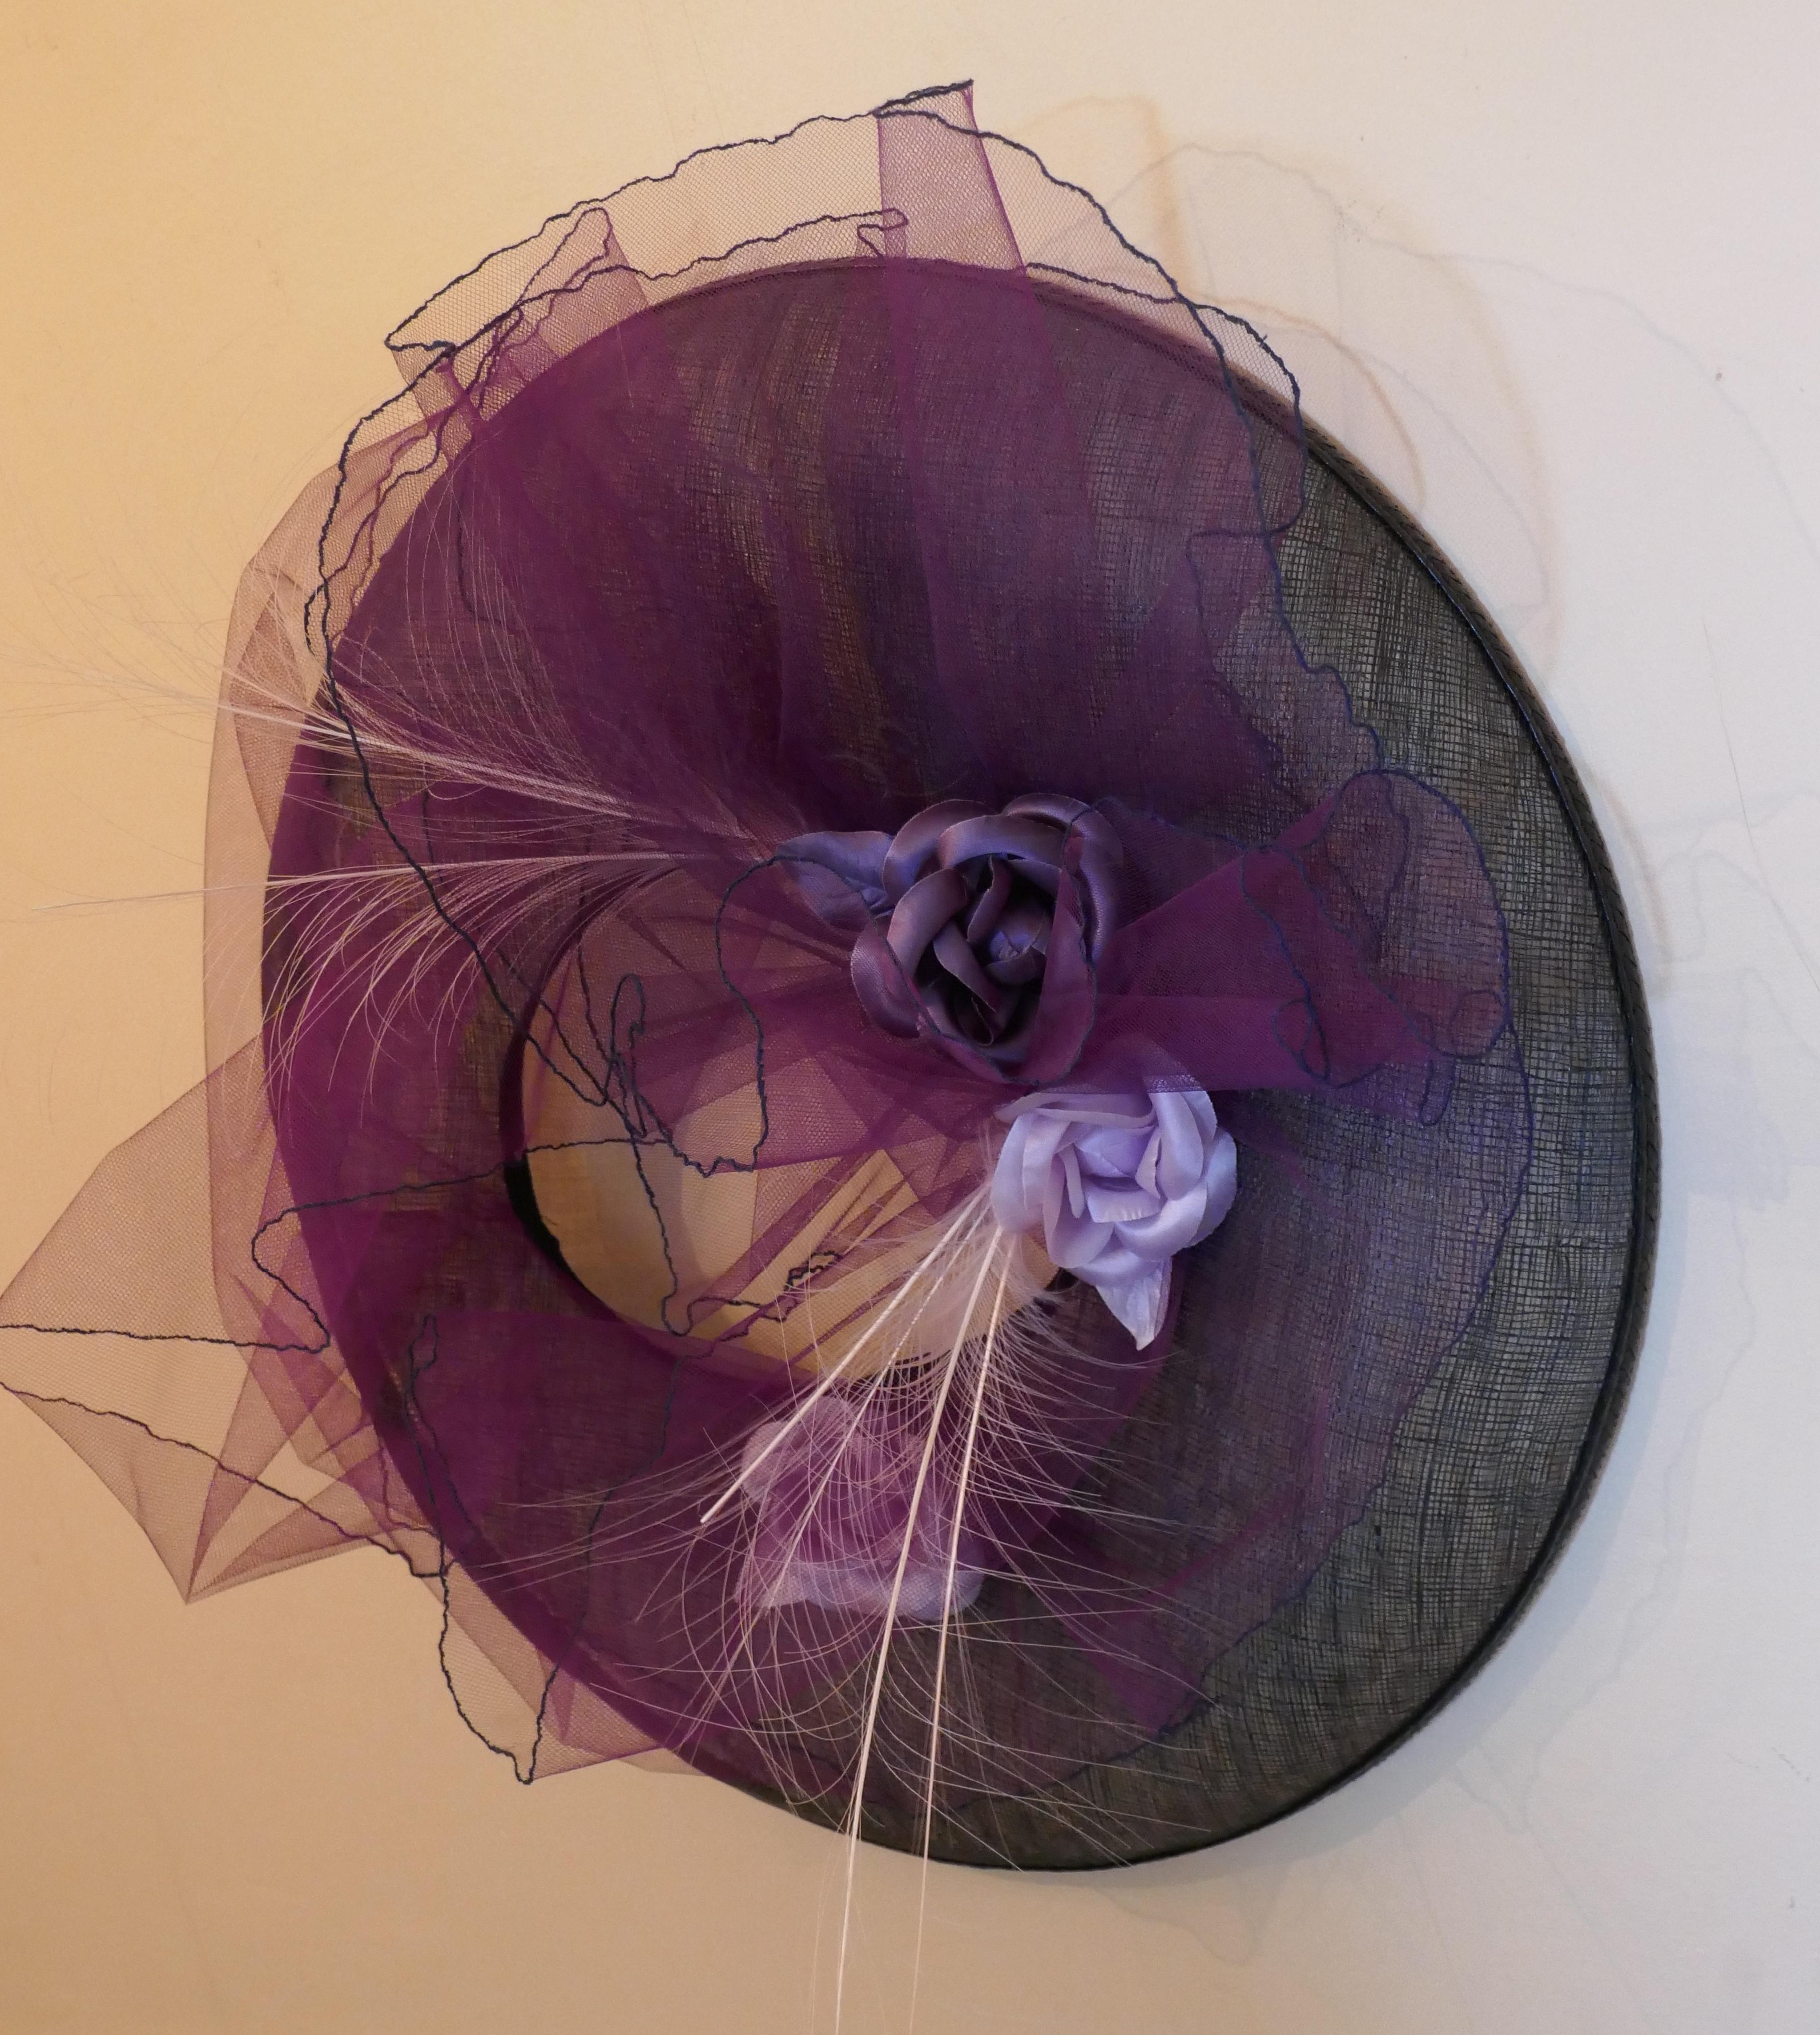 1950s Formal Summer Garden Party Hat, la Tribe des Oiseaux

Stunning Design from a Channel Islands Designer, the hat has large black mesh brim, with an open crown, it is decorated with silk flowers and ostrich feather quills, all brought together